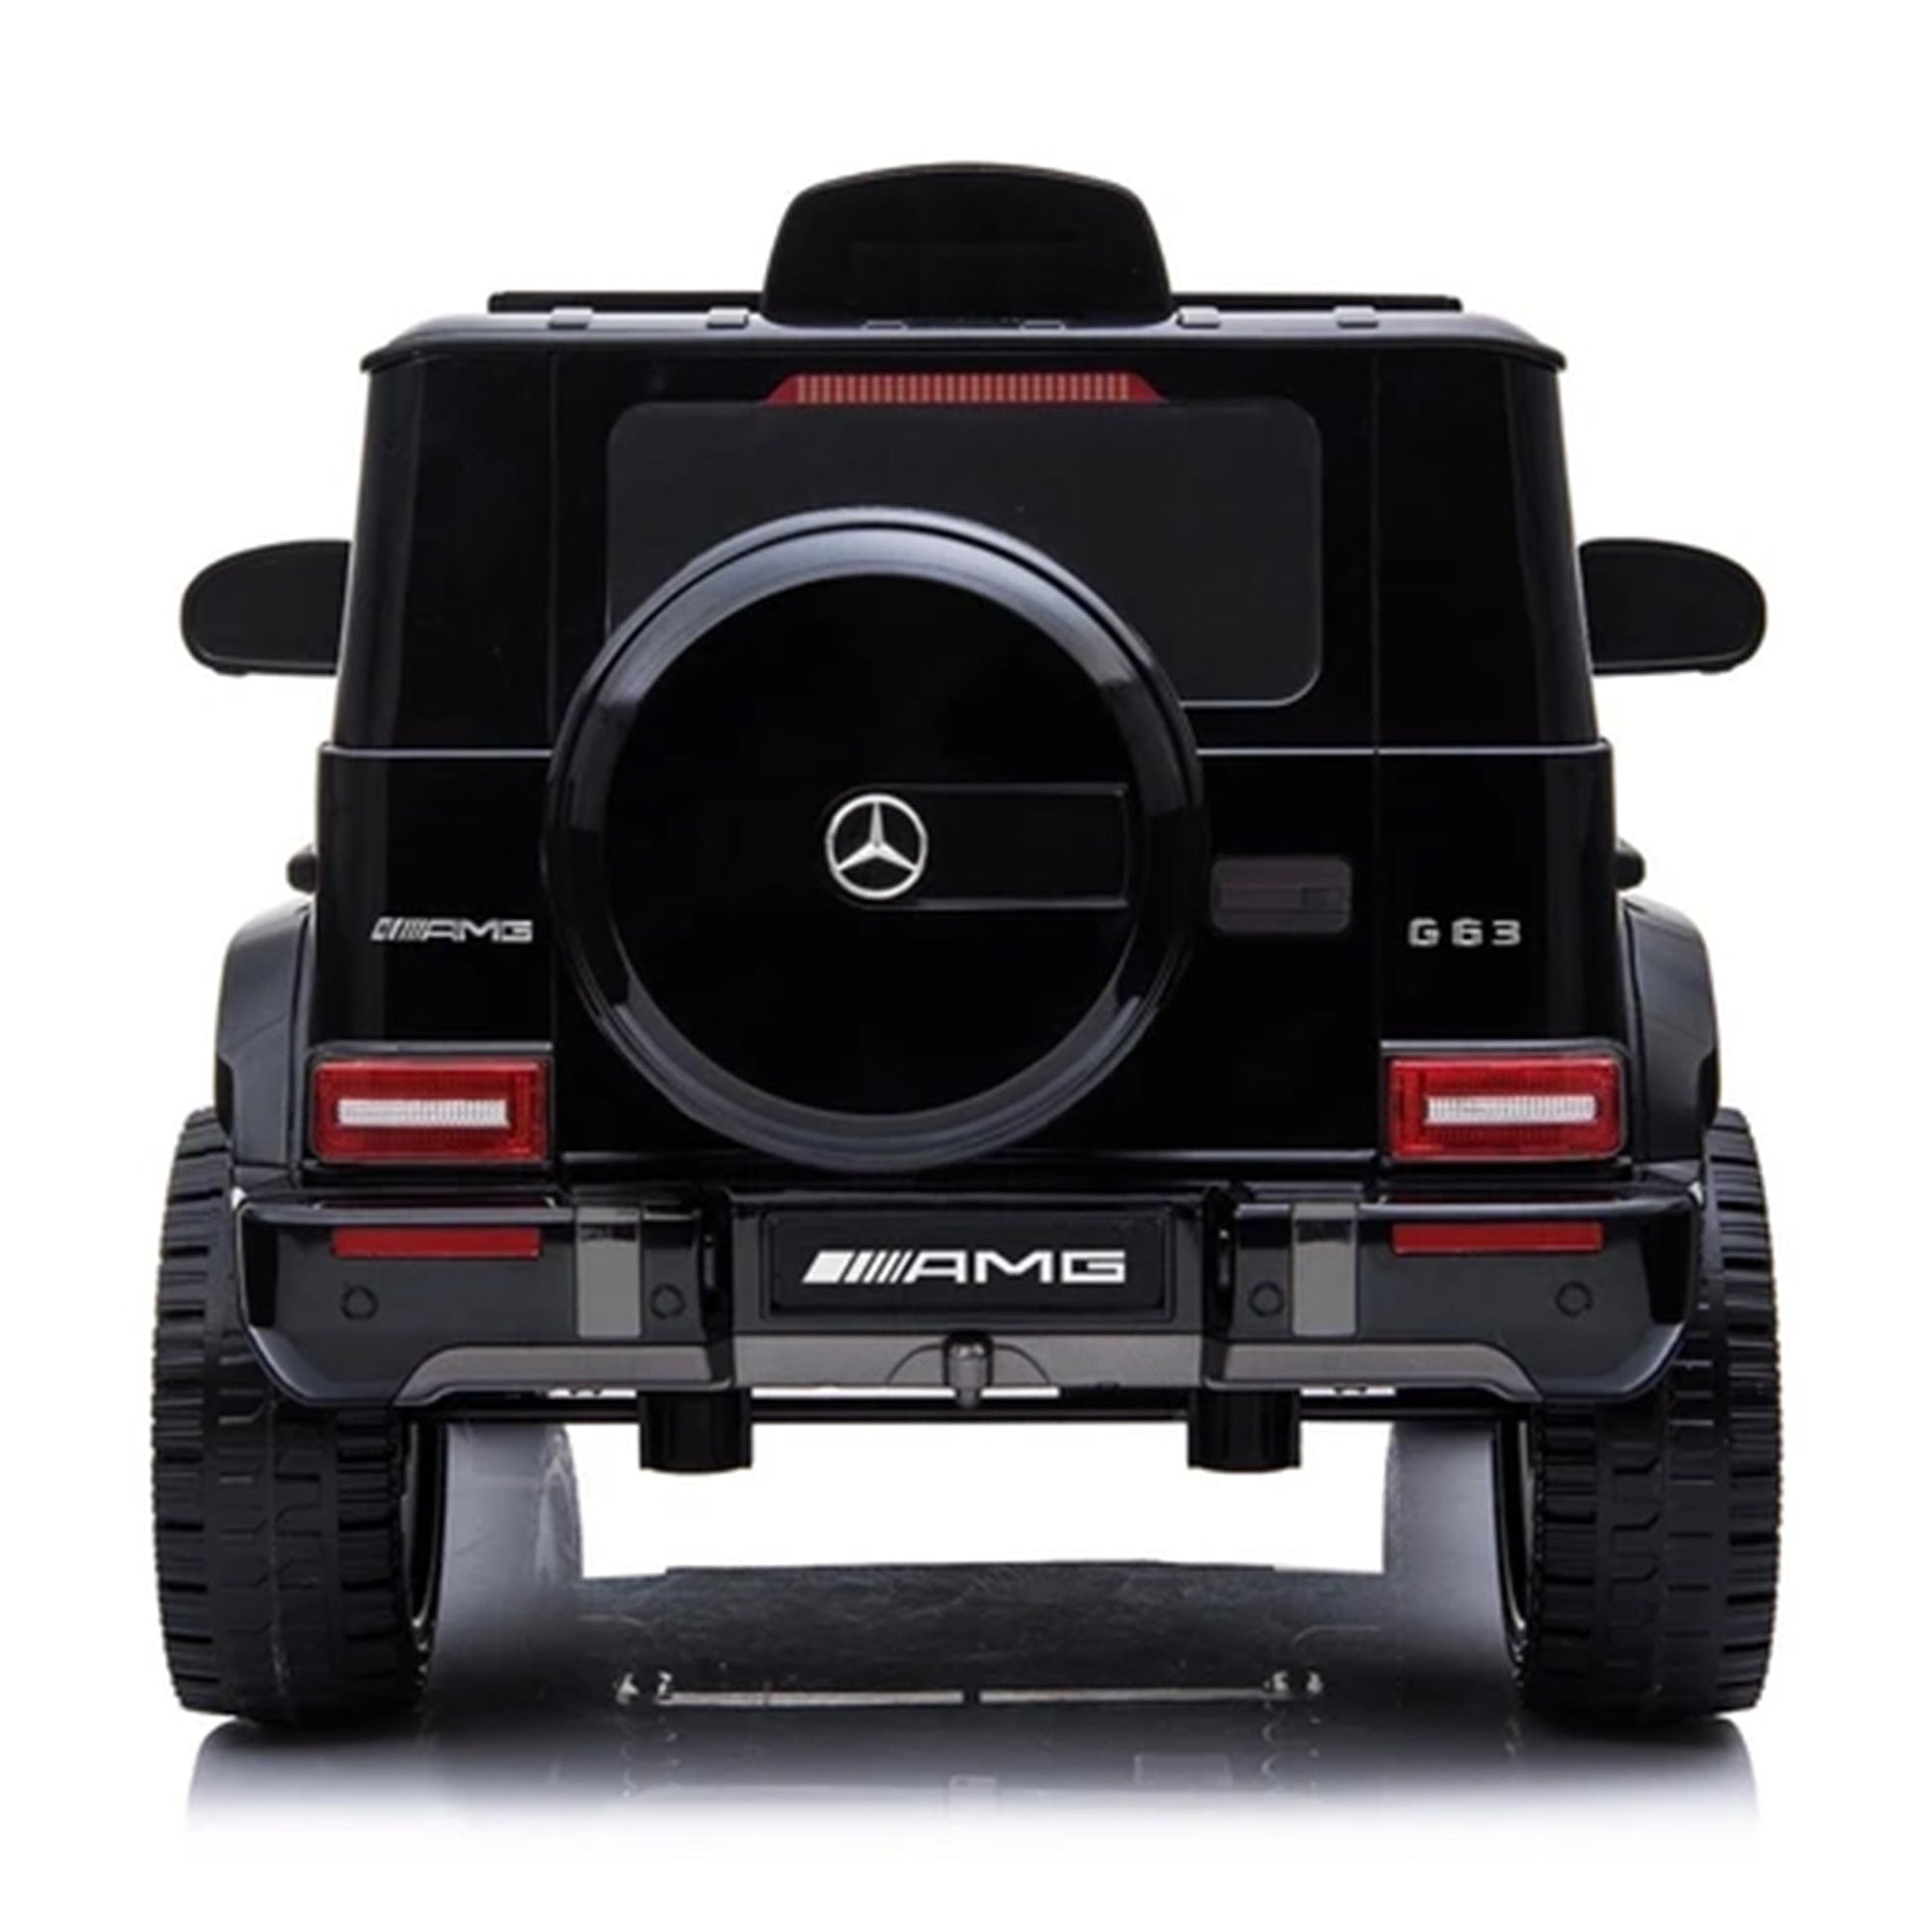 Black Mercedes G63 AMG toy car, electric ride-on model for children, displayed on a white background.